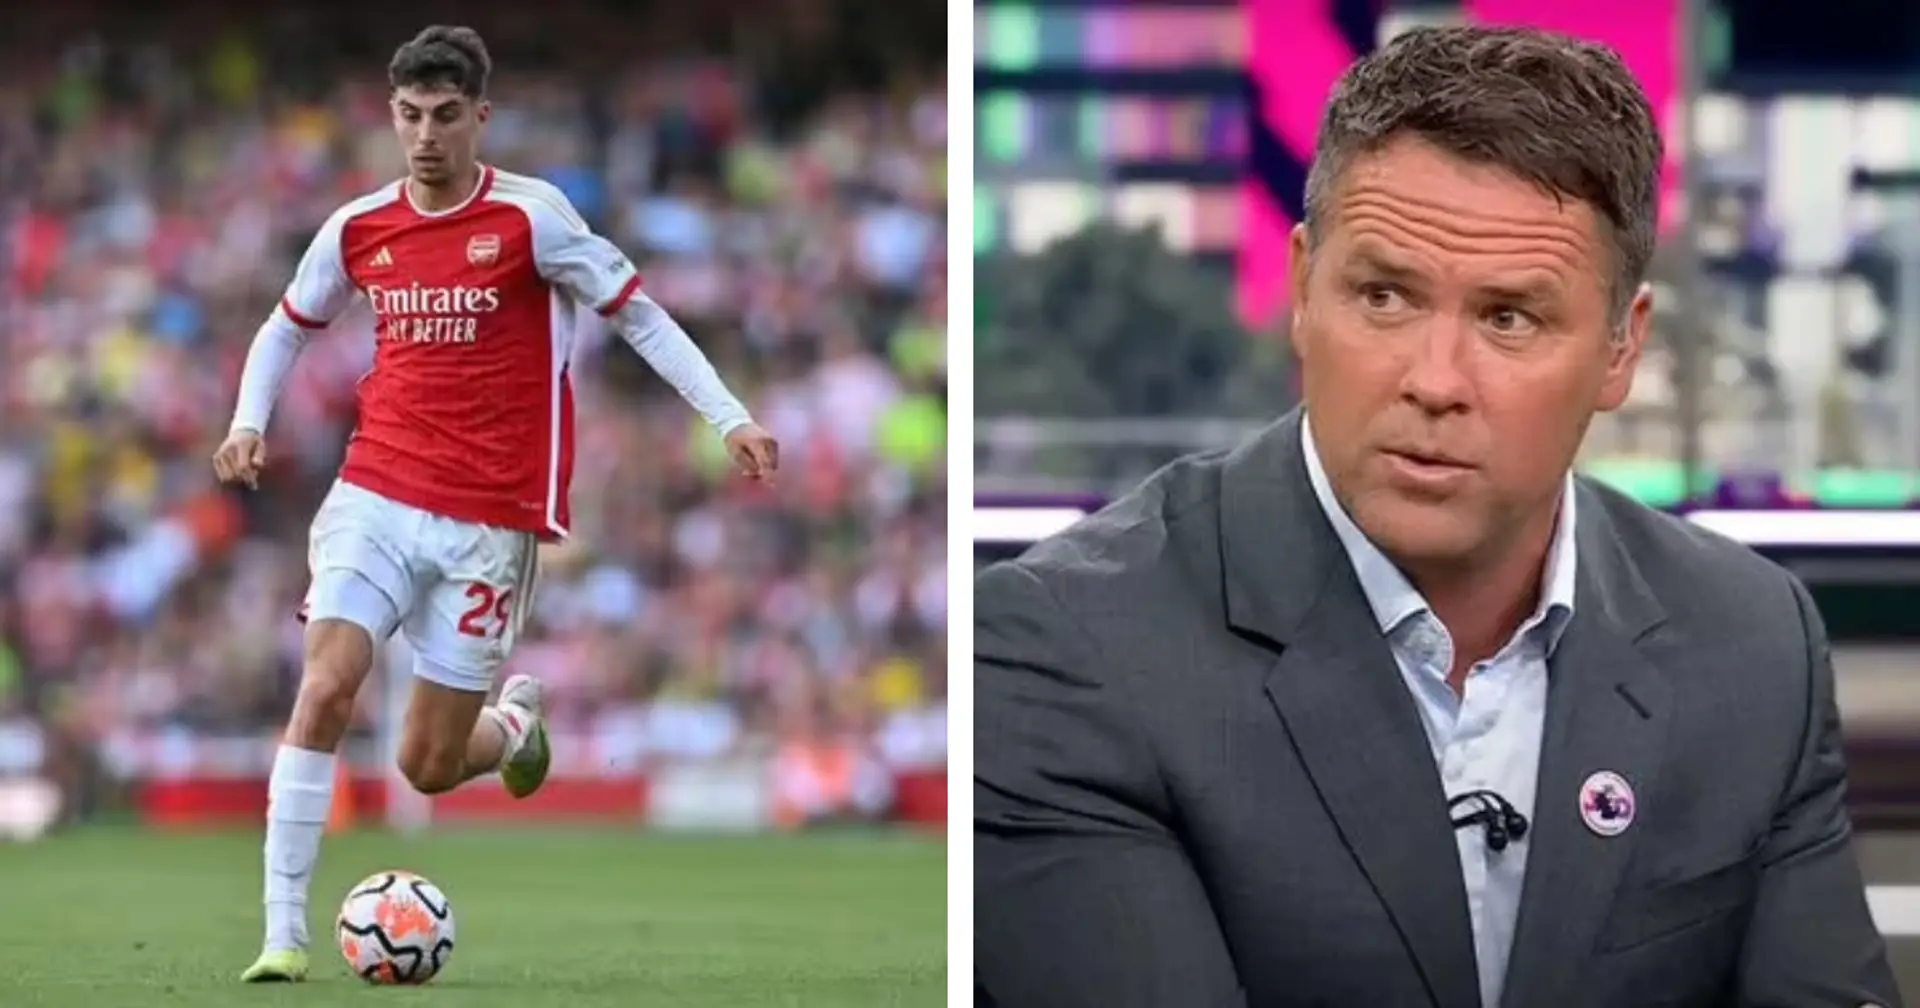 'You don't see that from a pro': Michael Owen shocked by Kai Havertz's performance vs Man United